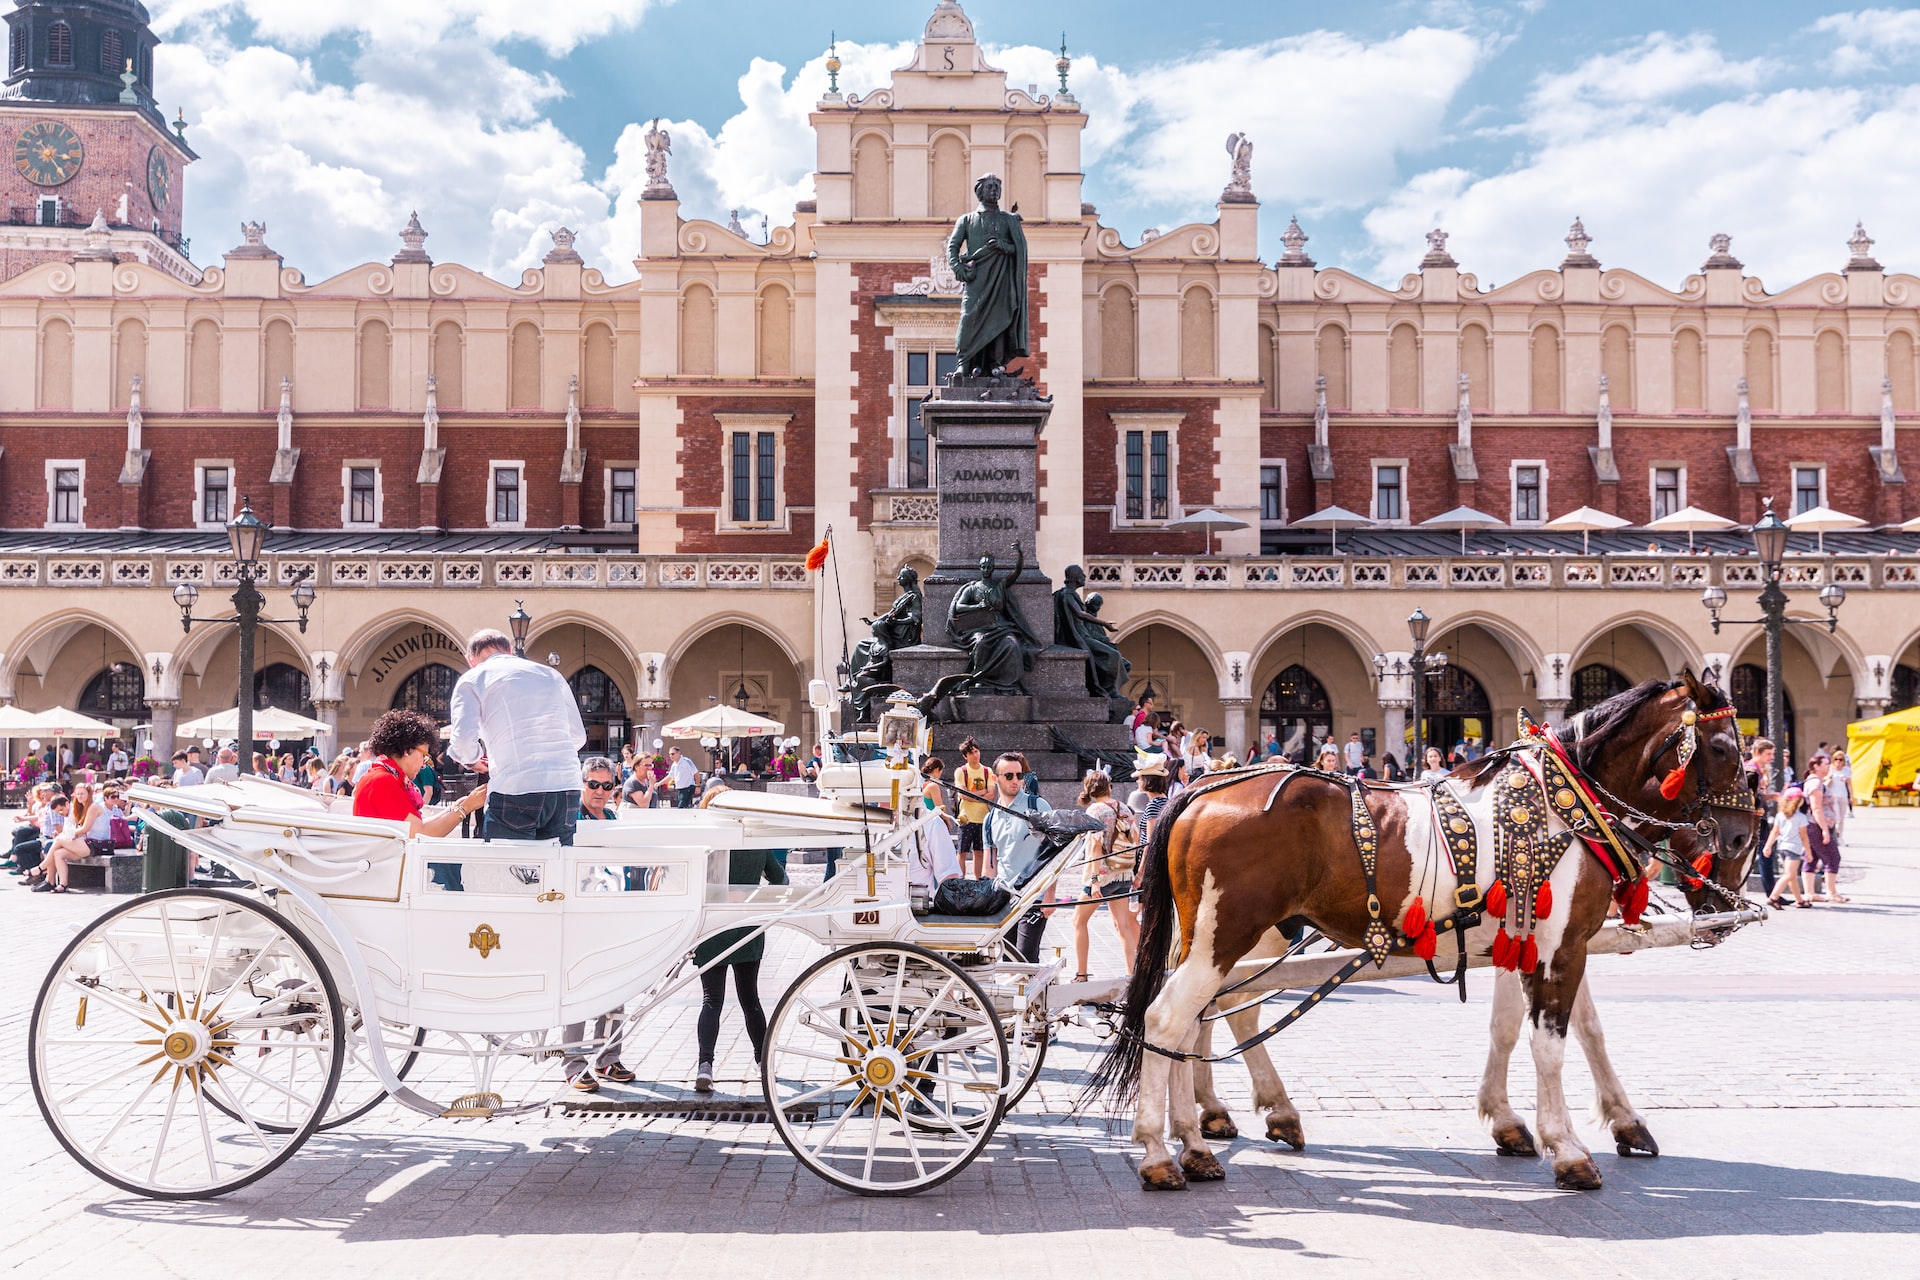 Travel the Western Europe on budget in Krakow
